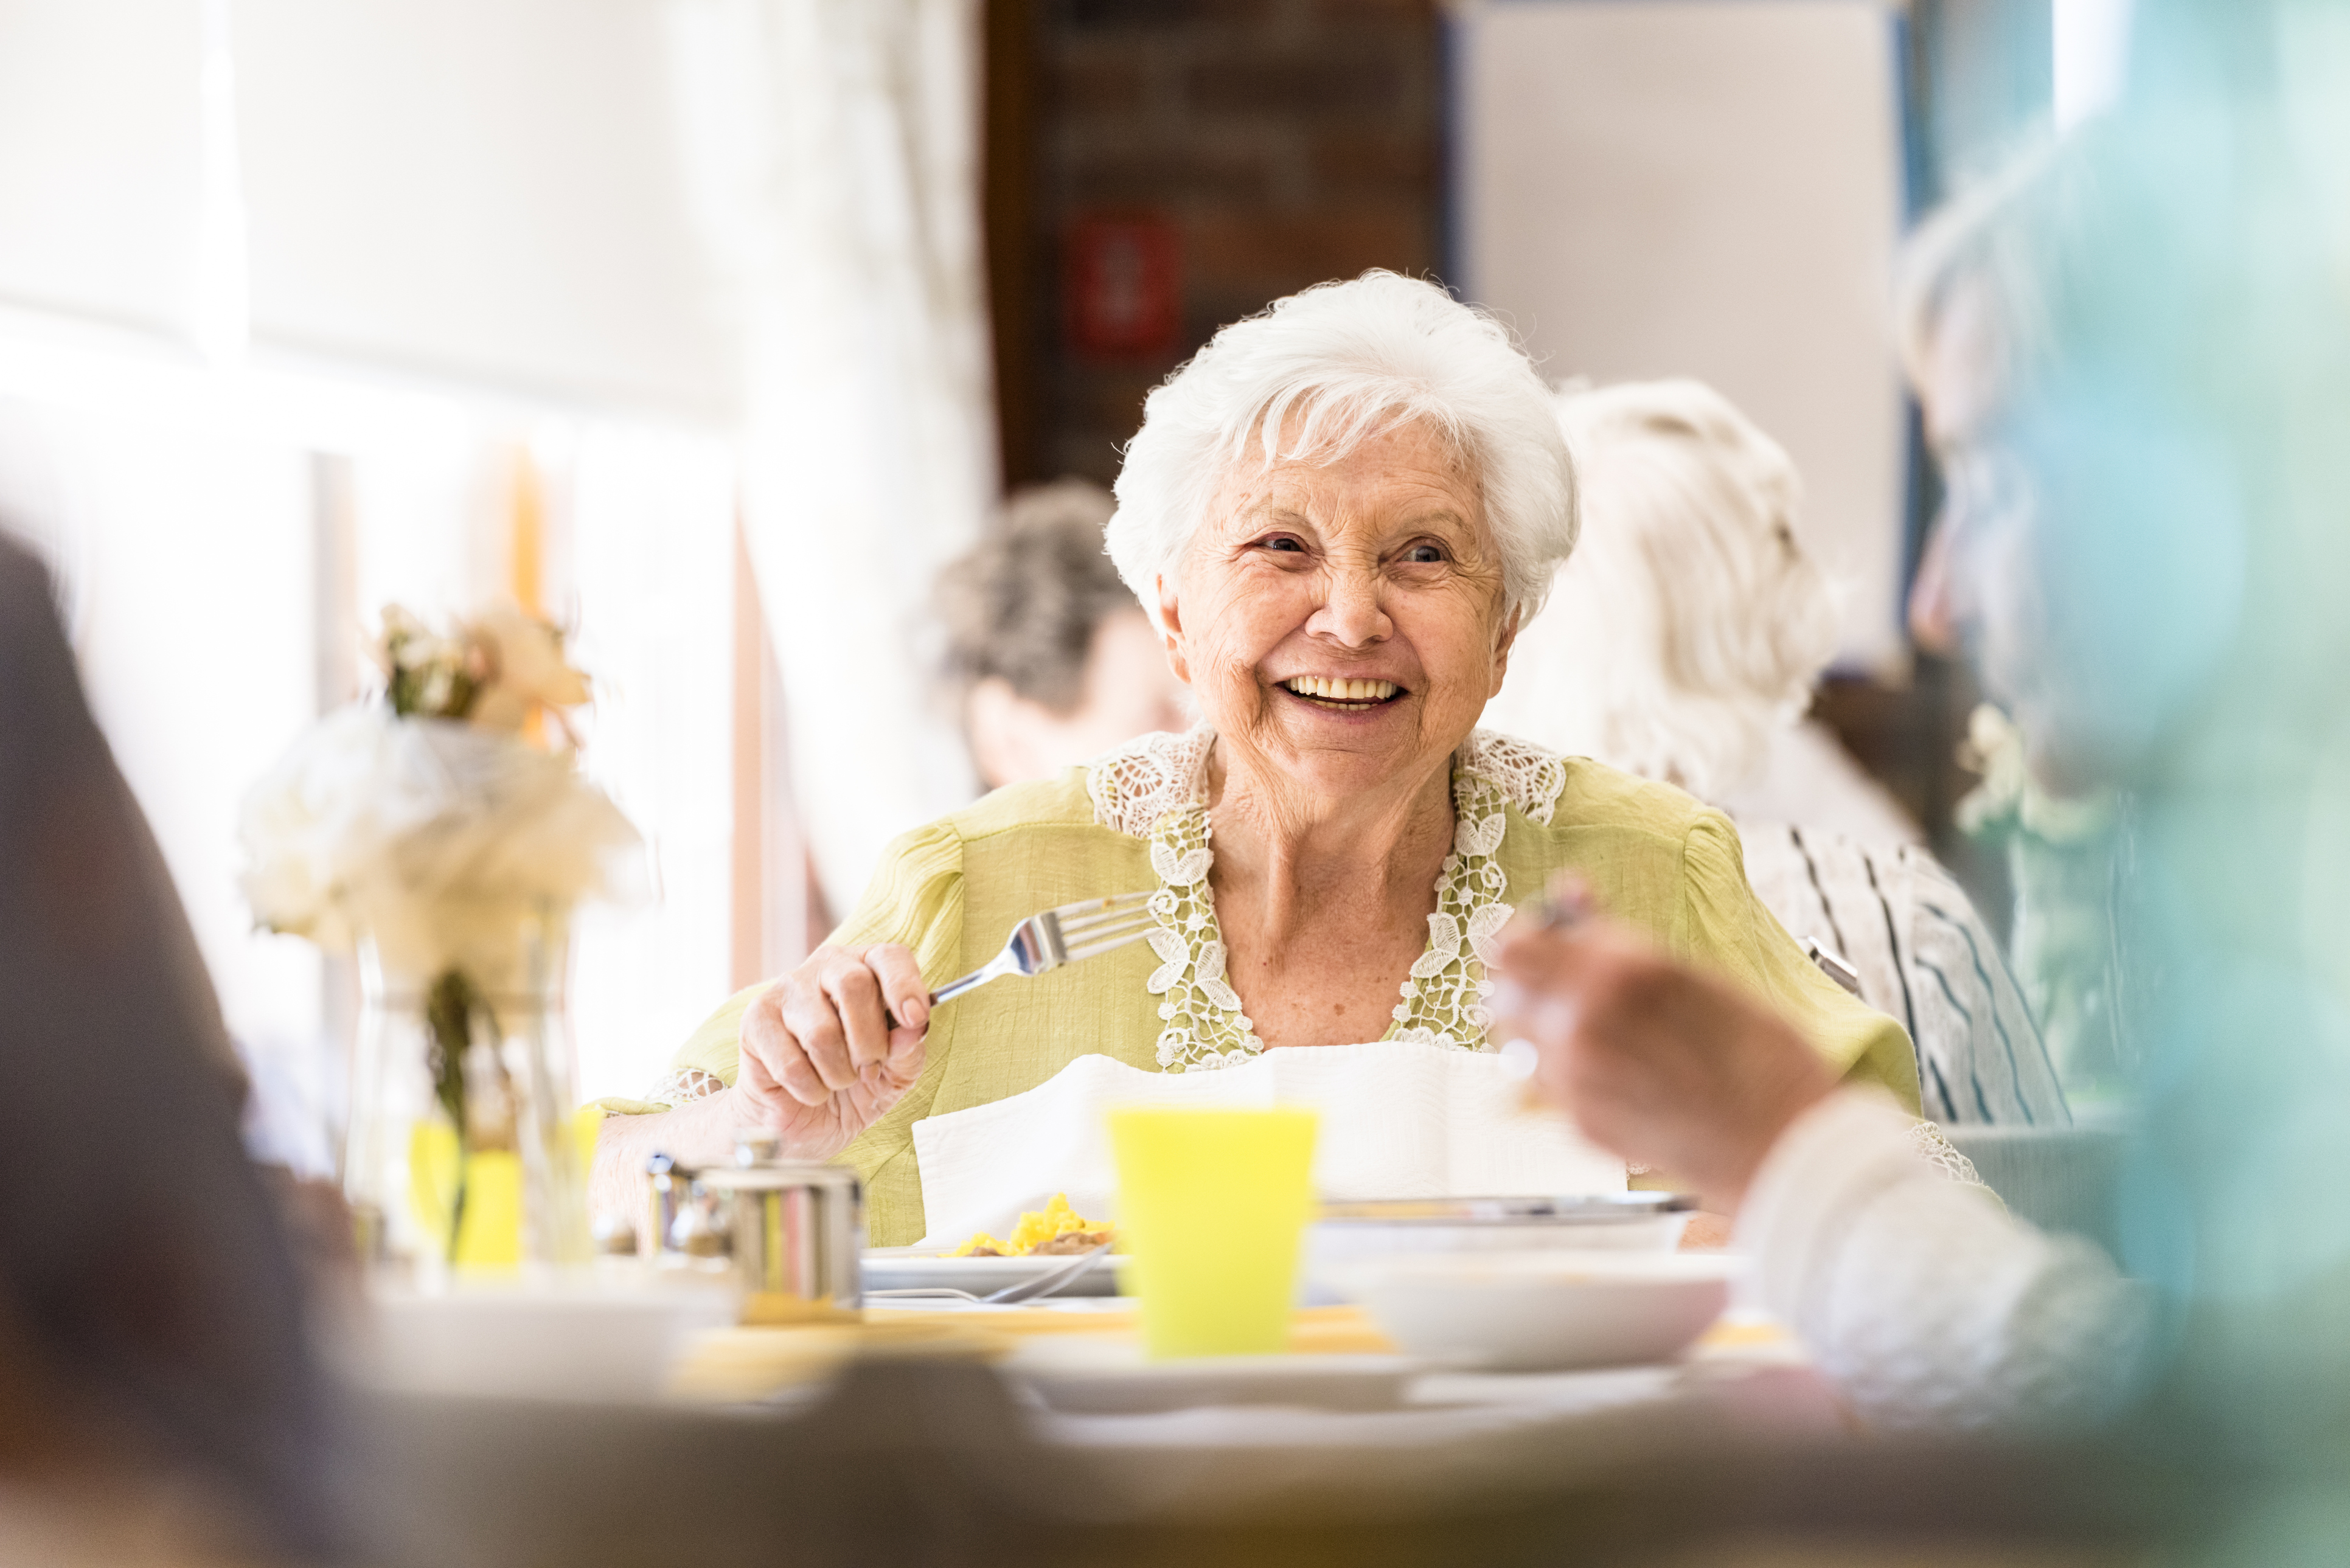 Older adults eating together at a large table, smiling